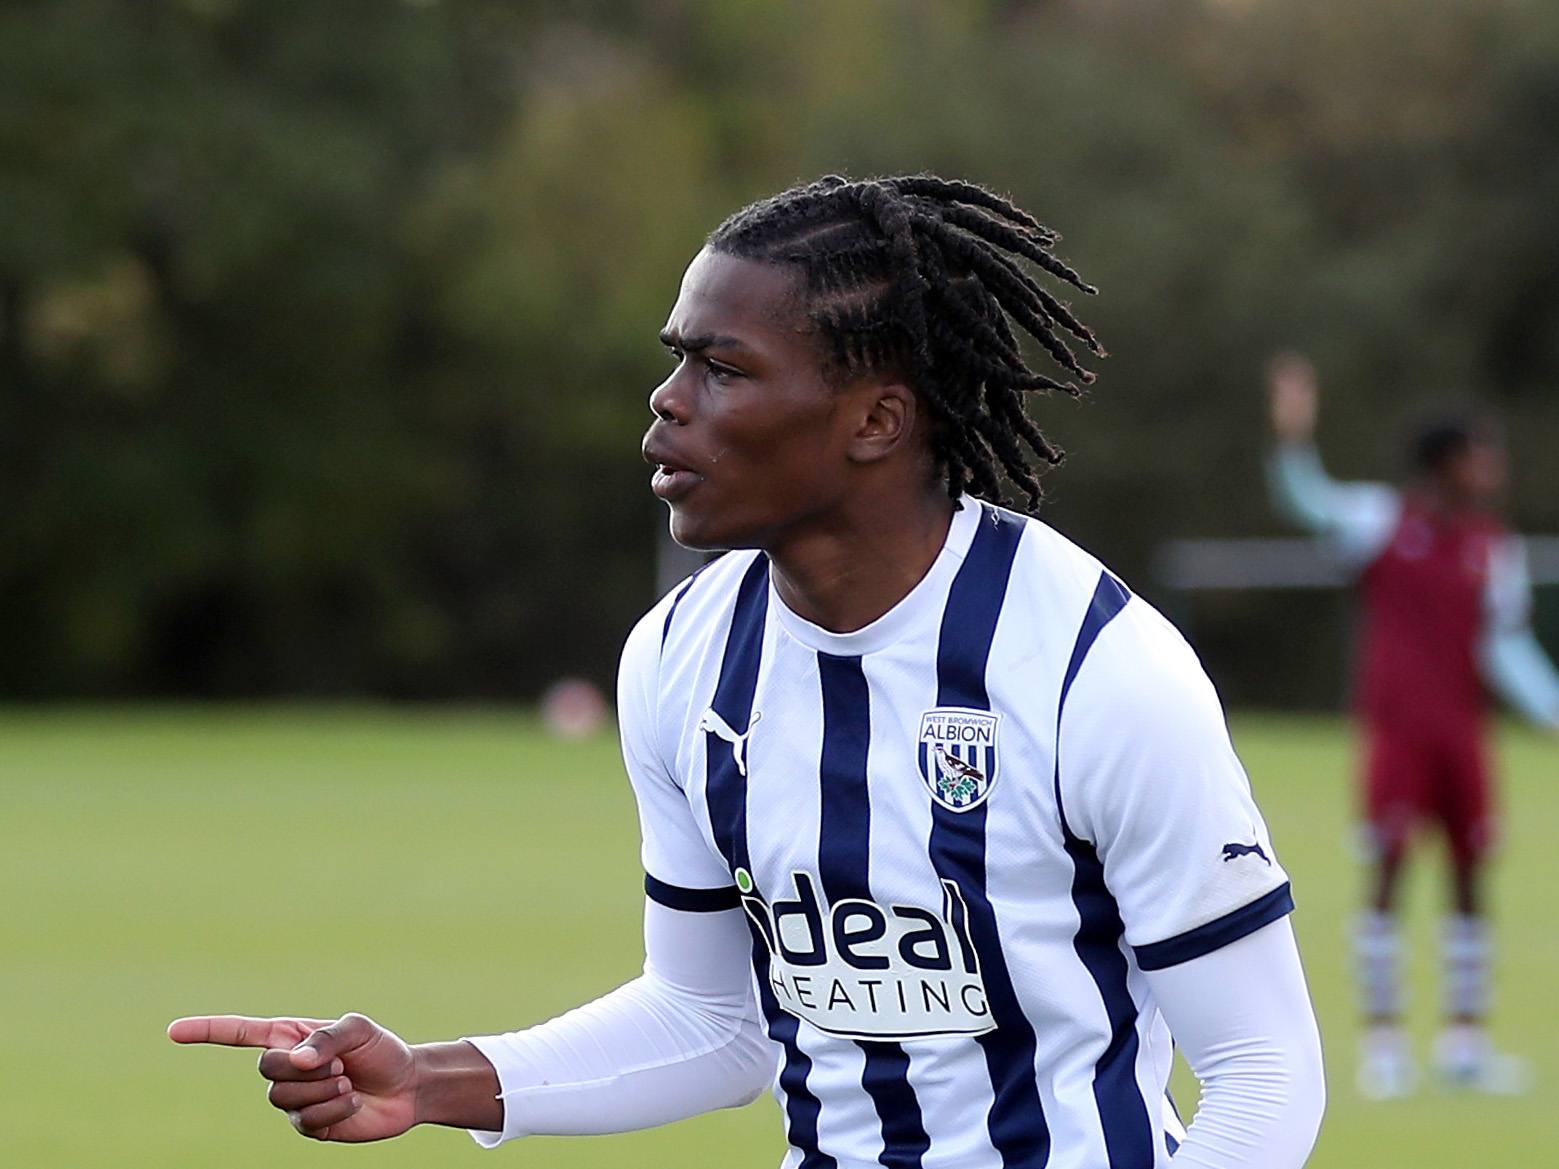 Divine Onyemachi scoring a goal for Albion's U18 side